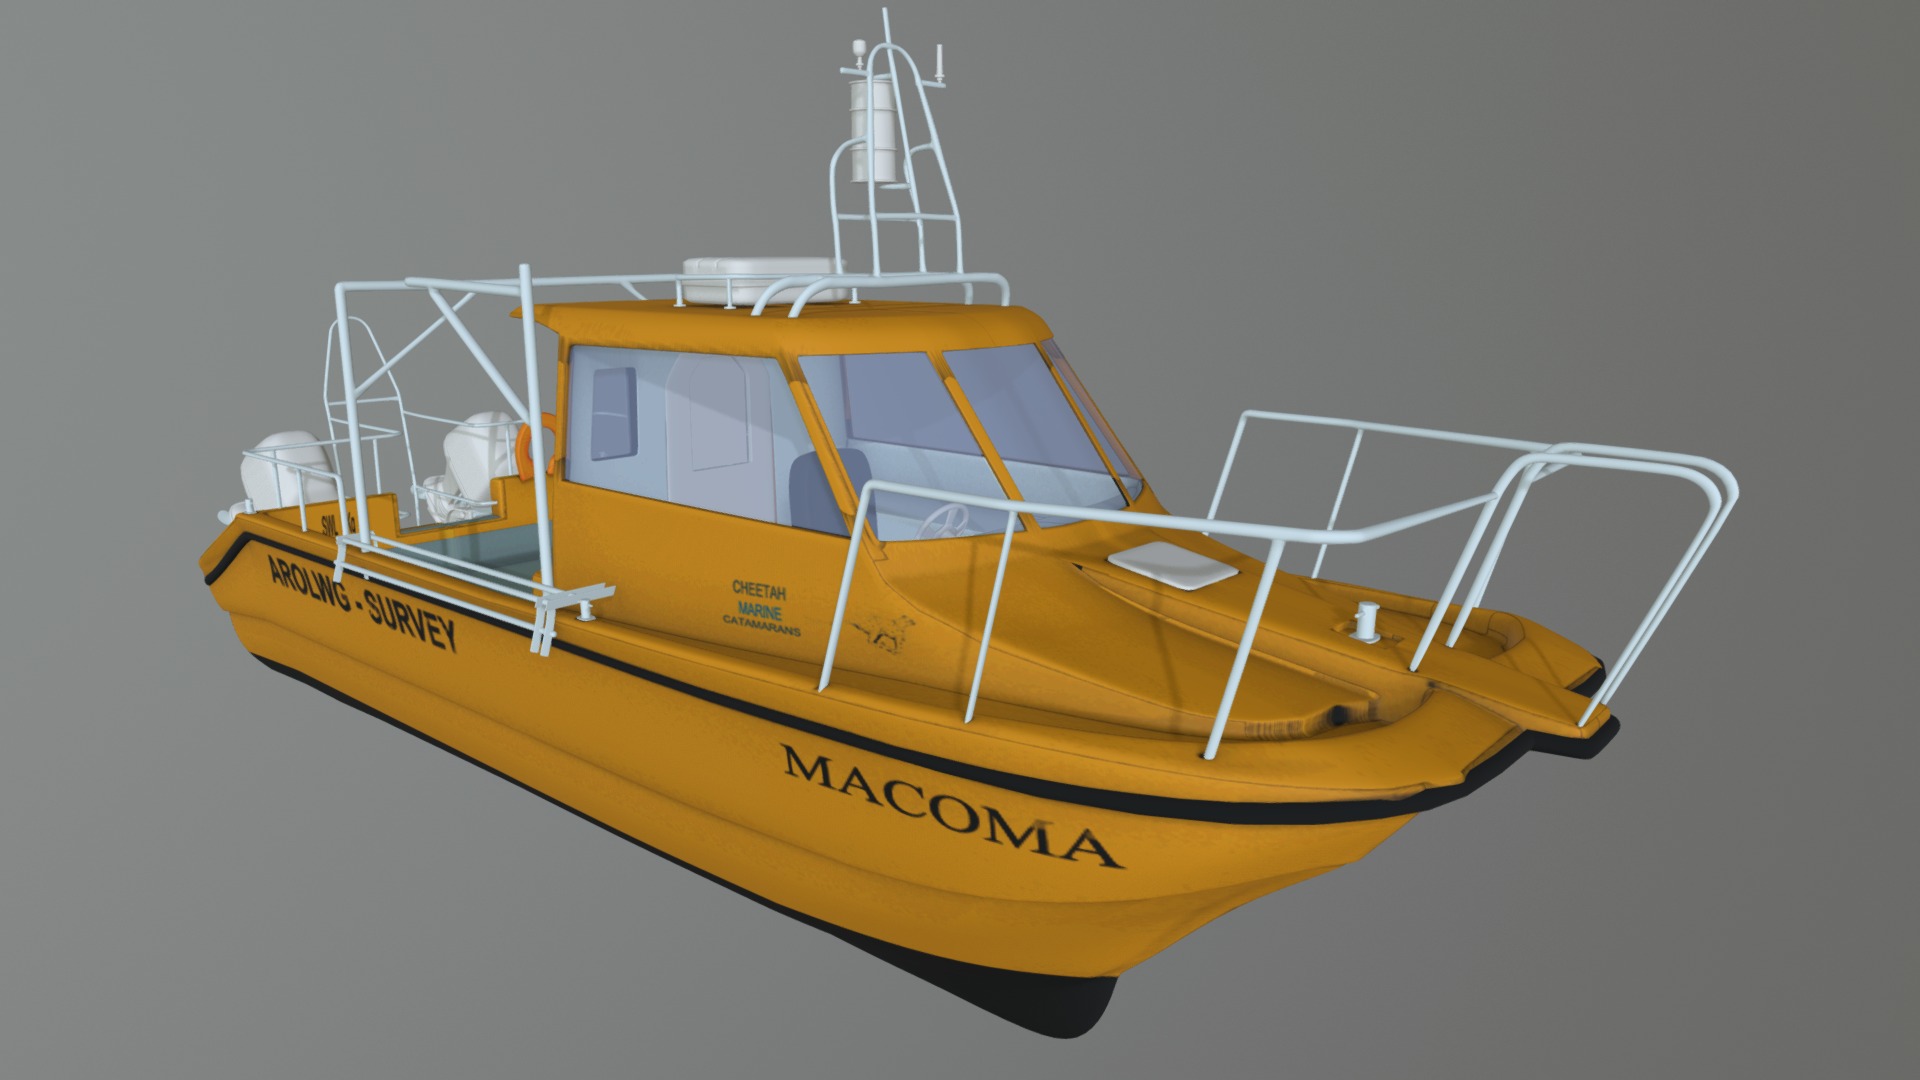 3D model Macoma, research vessel for a  University - This is a 3D model of the Macoma, research vessel for a  University. The 3D model is about a yellow and black boat.